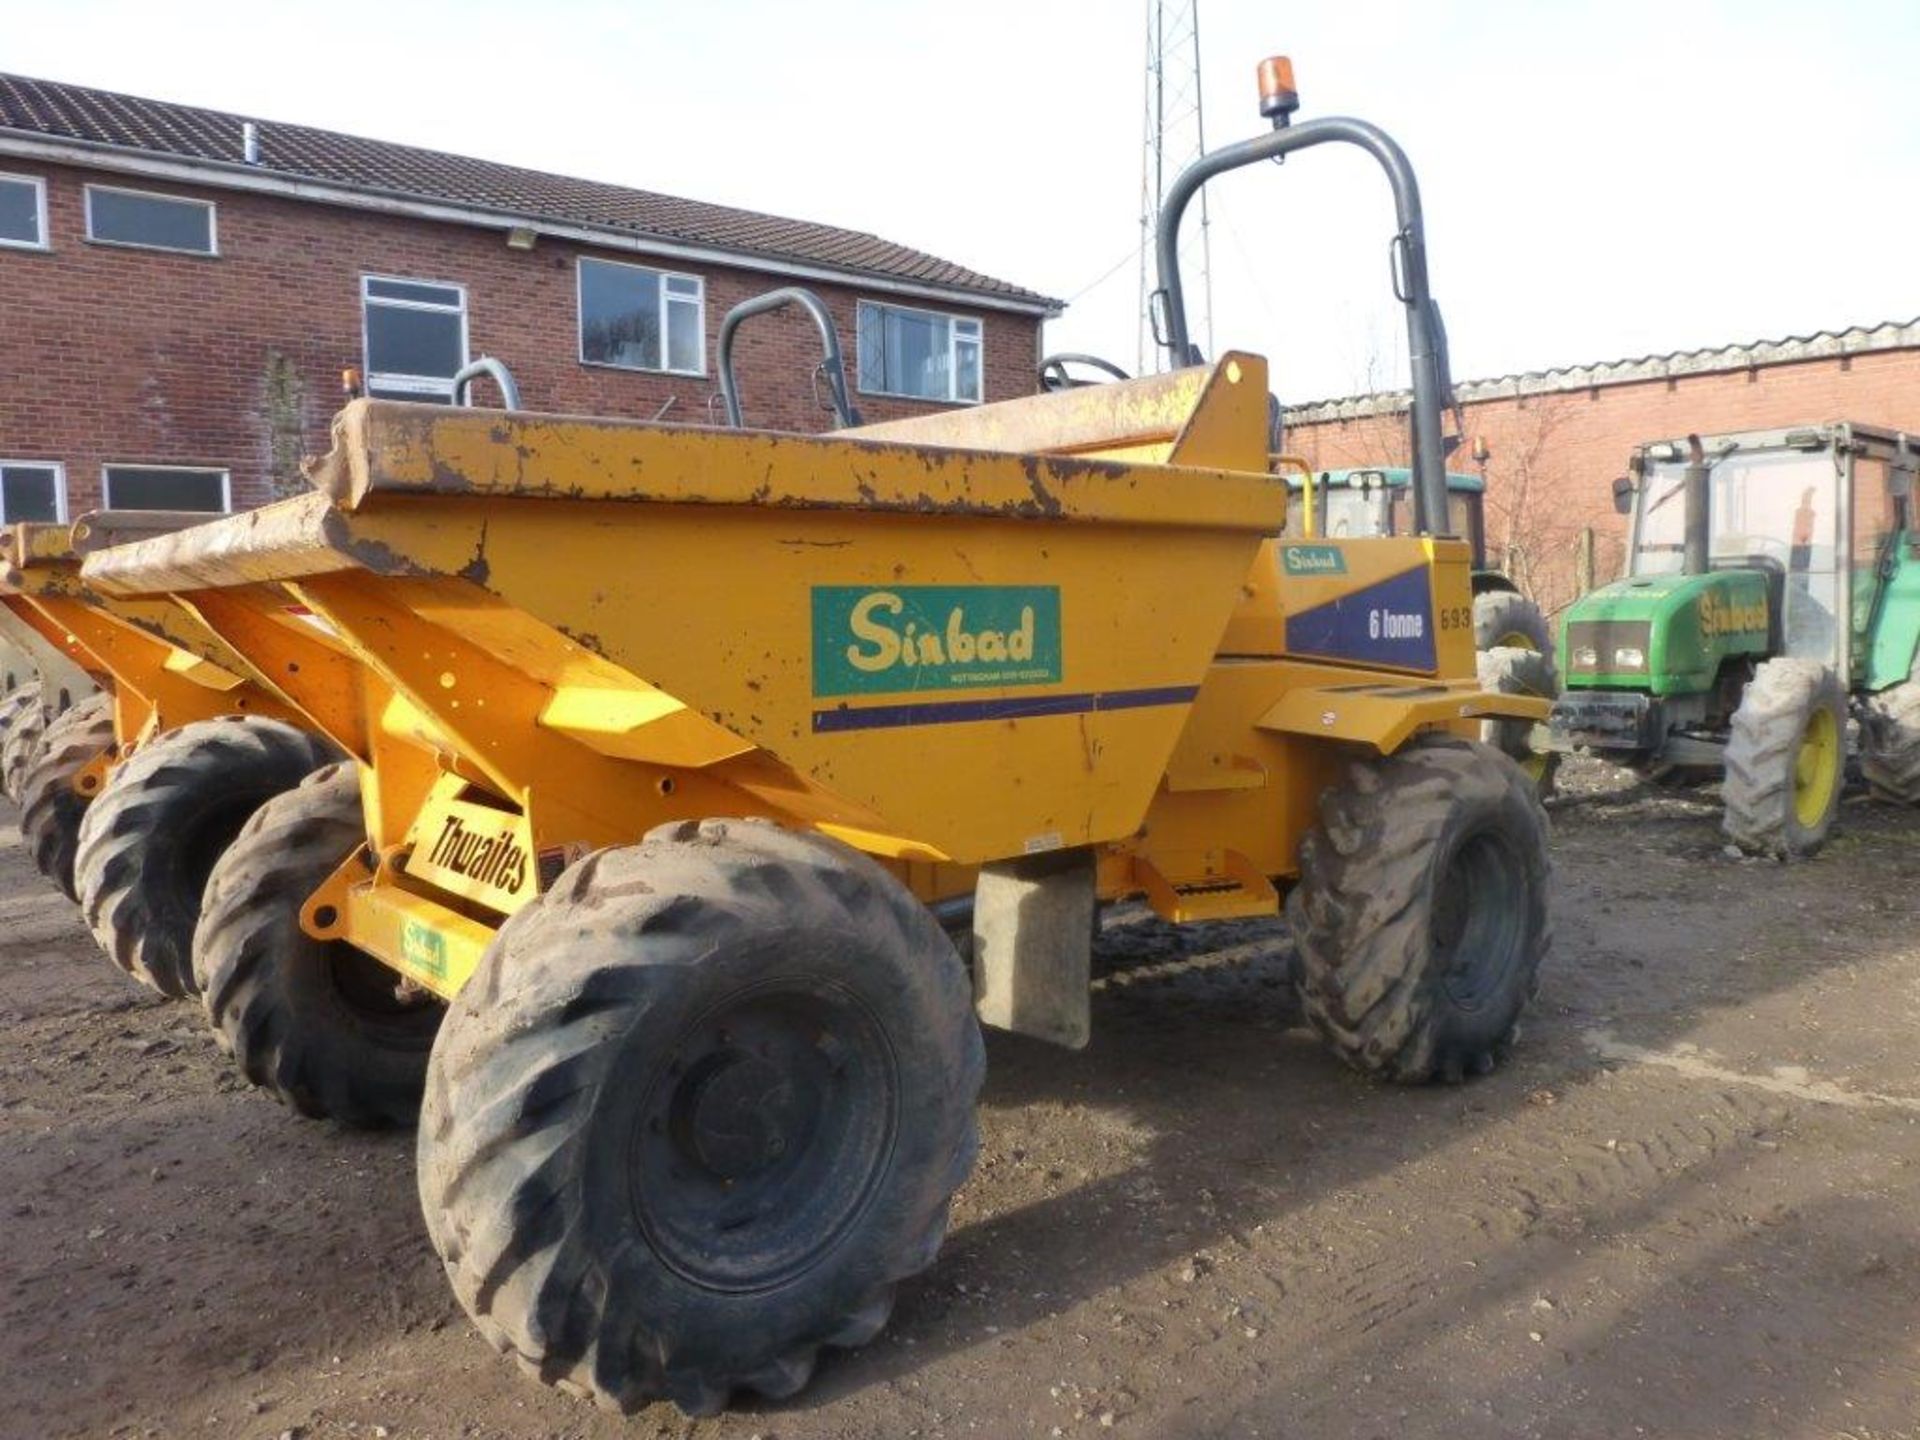 Thwaites 6-tonne 4x4 articulated dumper (2007), indicated hours 1484.2, weight 4160Kg, VIN no. - Image 2 of 6